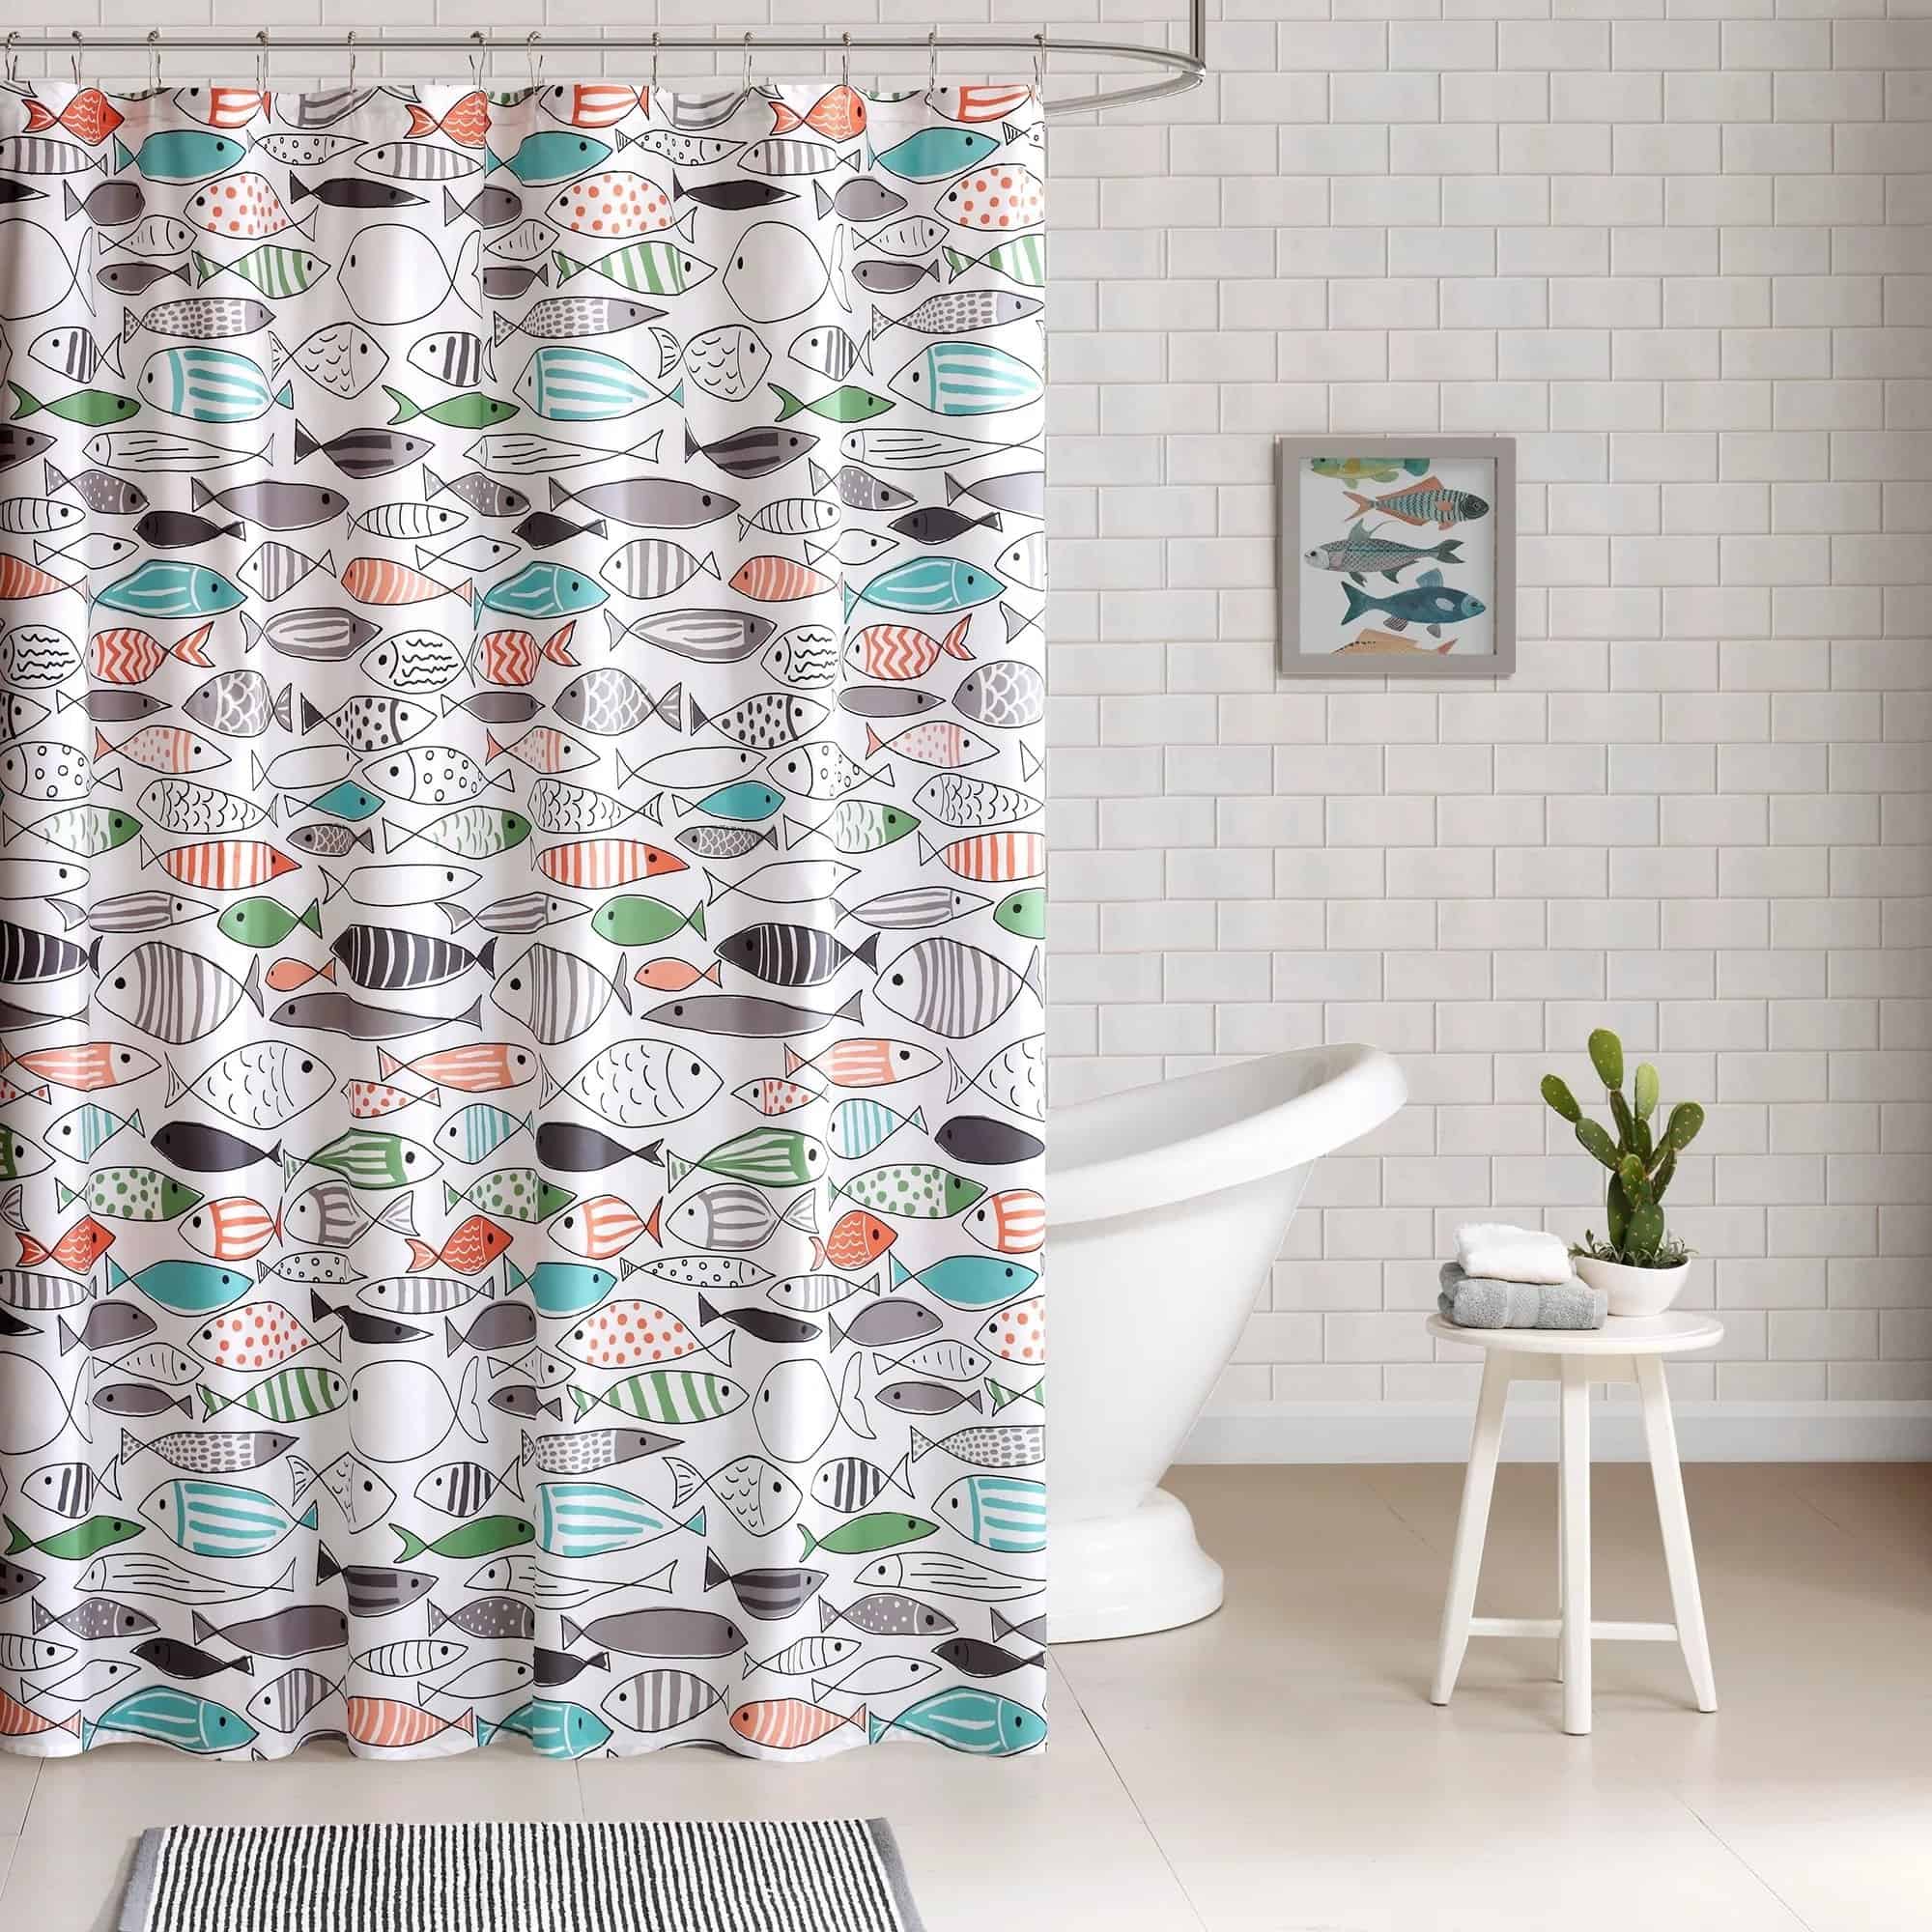 Create A Pop Of Color With Shower Curtains